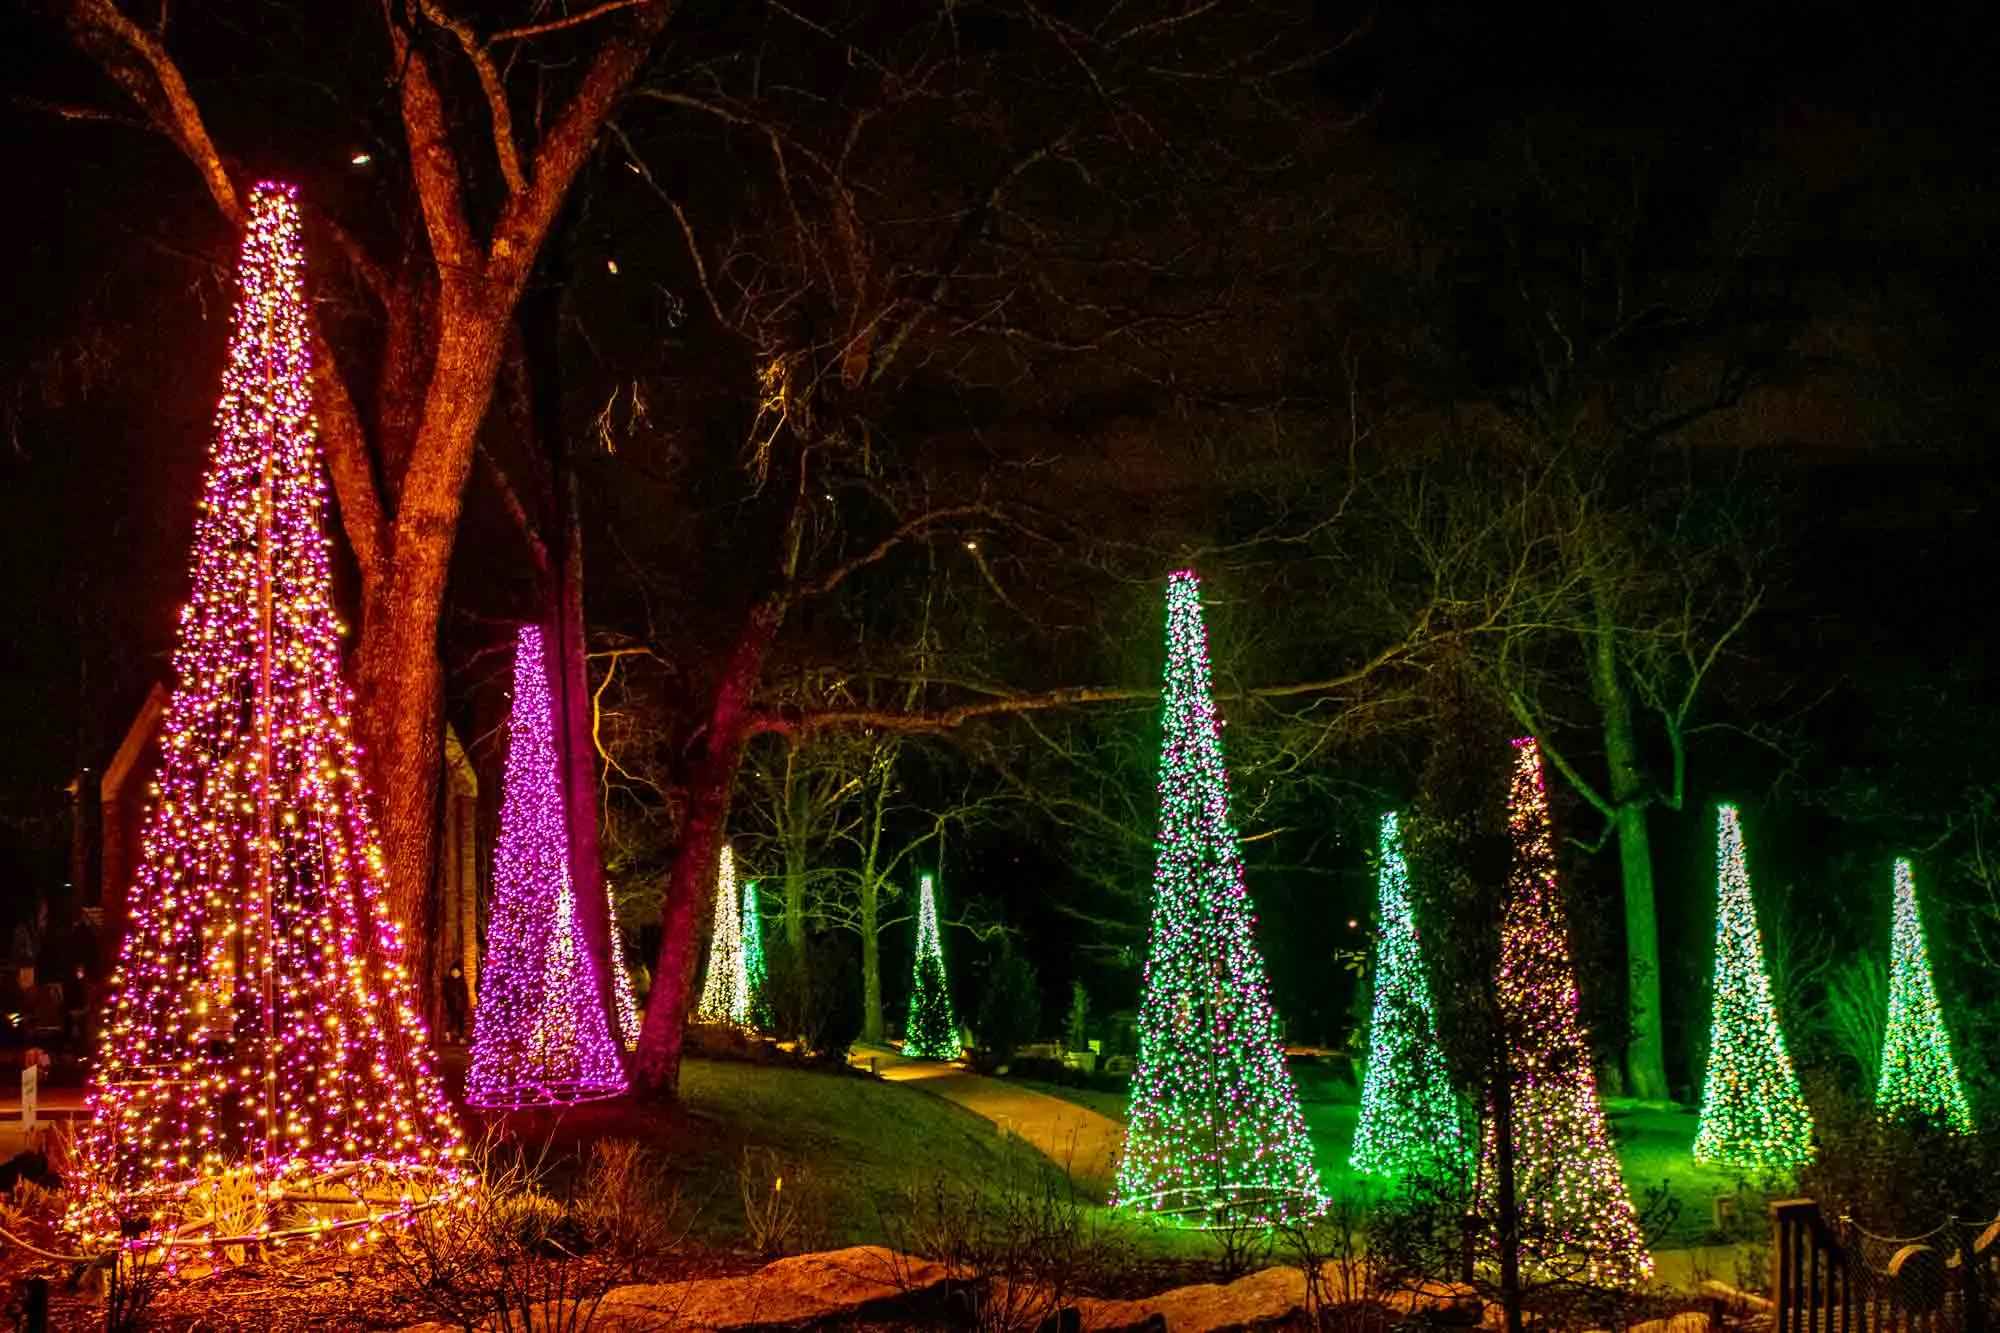 Green, pink, and white lights strung in the shape of Christmas trees.